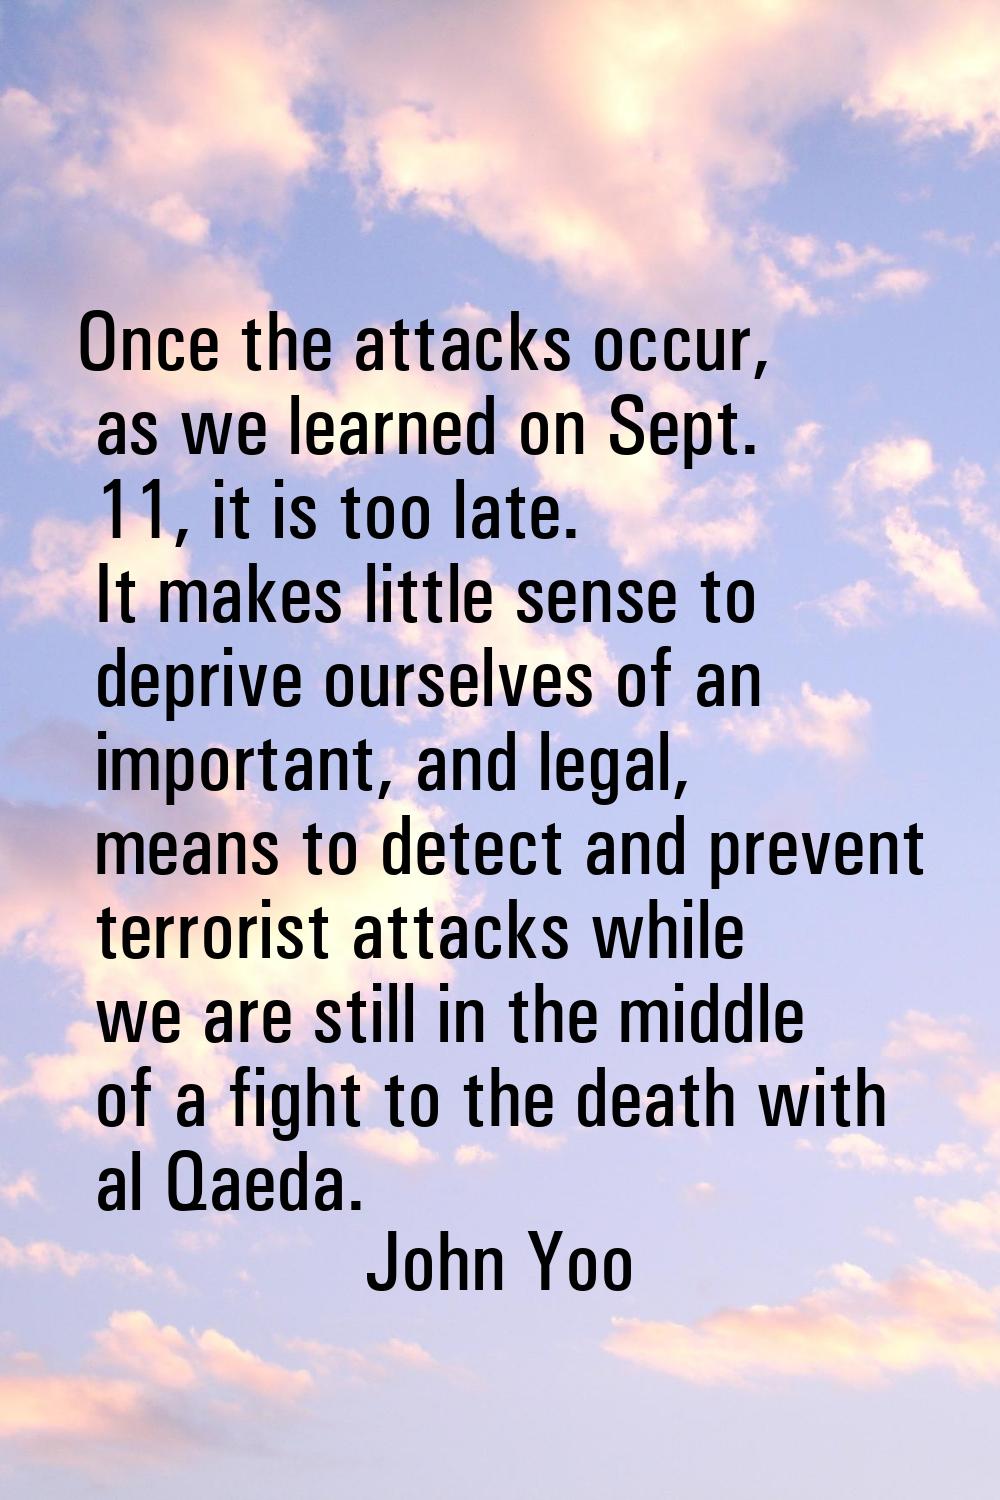 Once the attacks occur, as we learned on Sept. 11, it is too late. It makes little sense to deprive